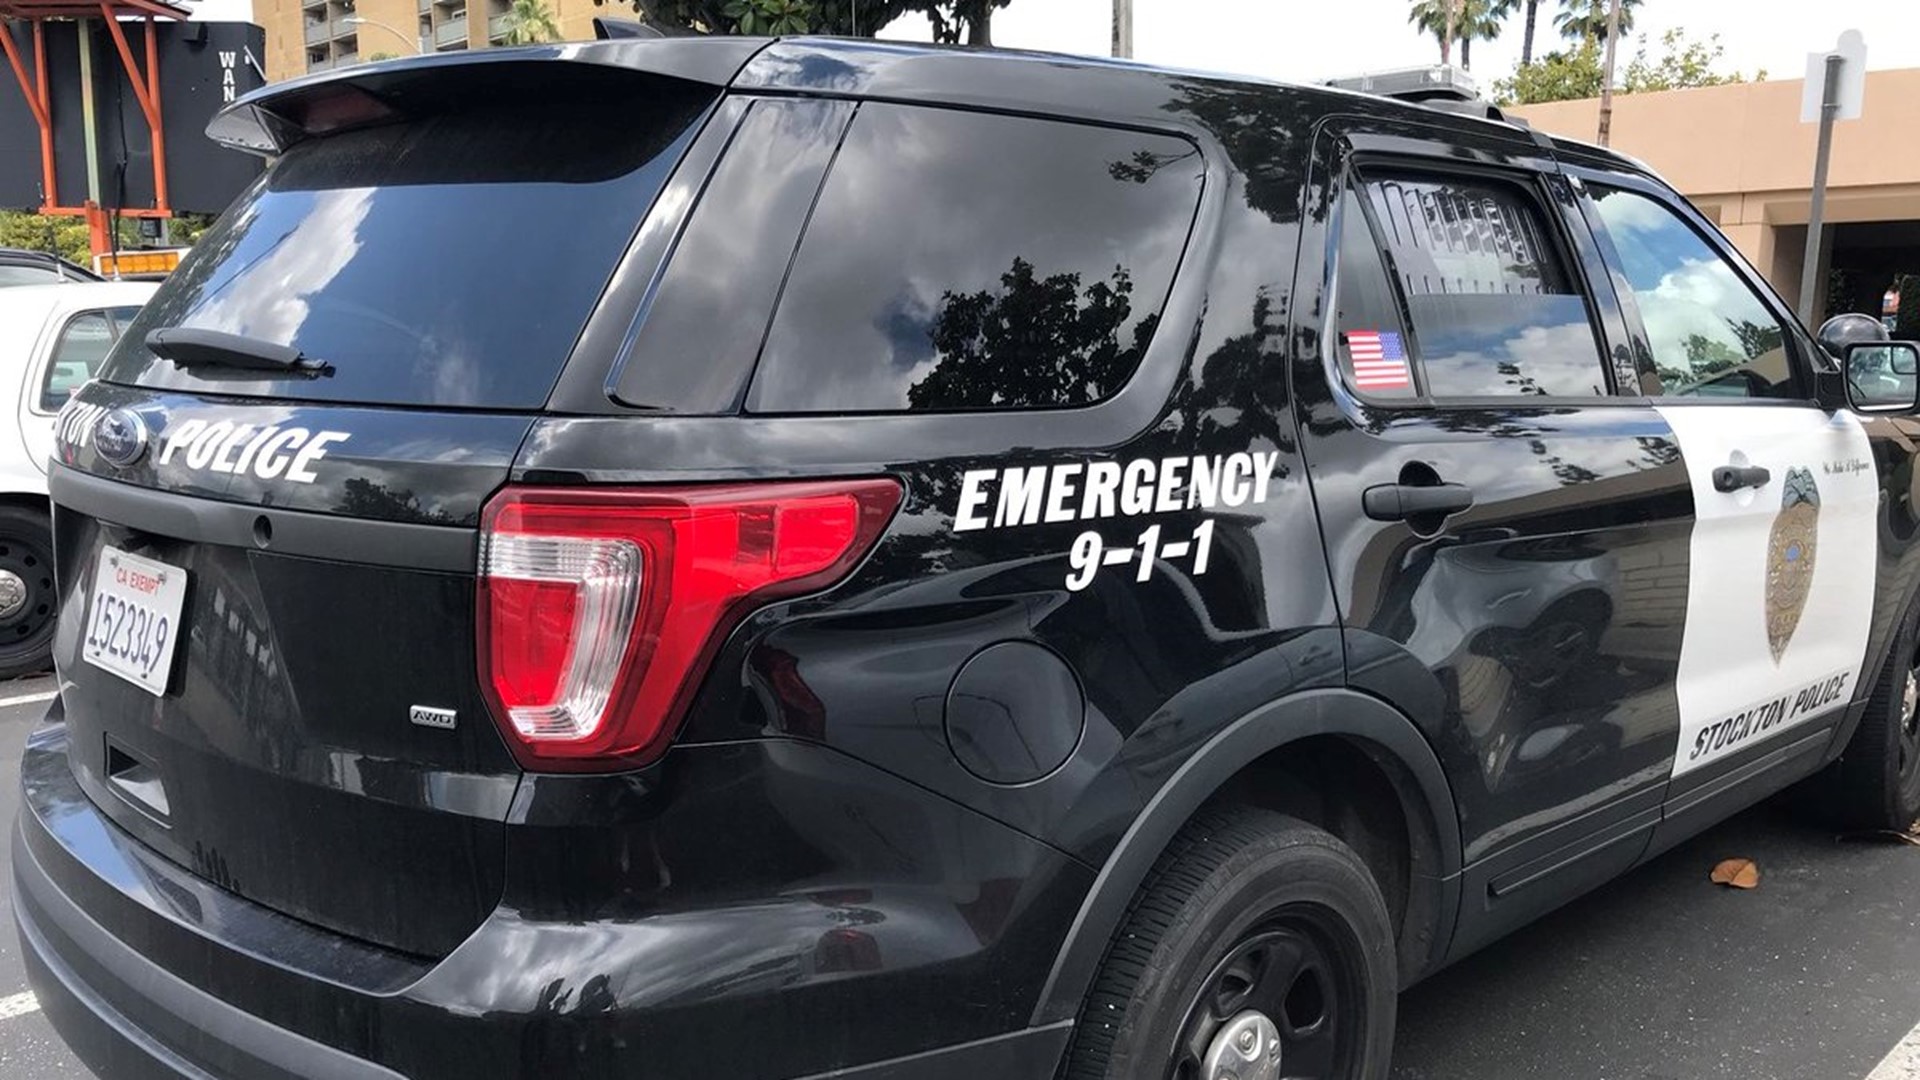 After the 20th homicide of the year was reported in Stockton, police have come up with a new strategy called "Operation RVN" to try and curb the violence.